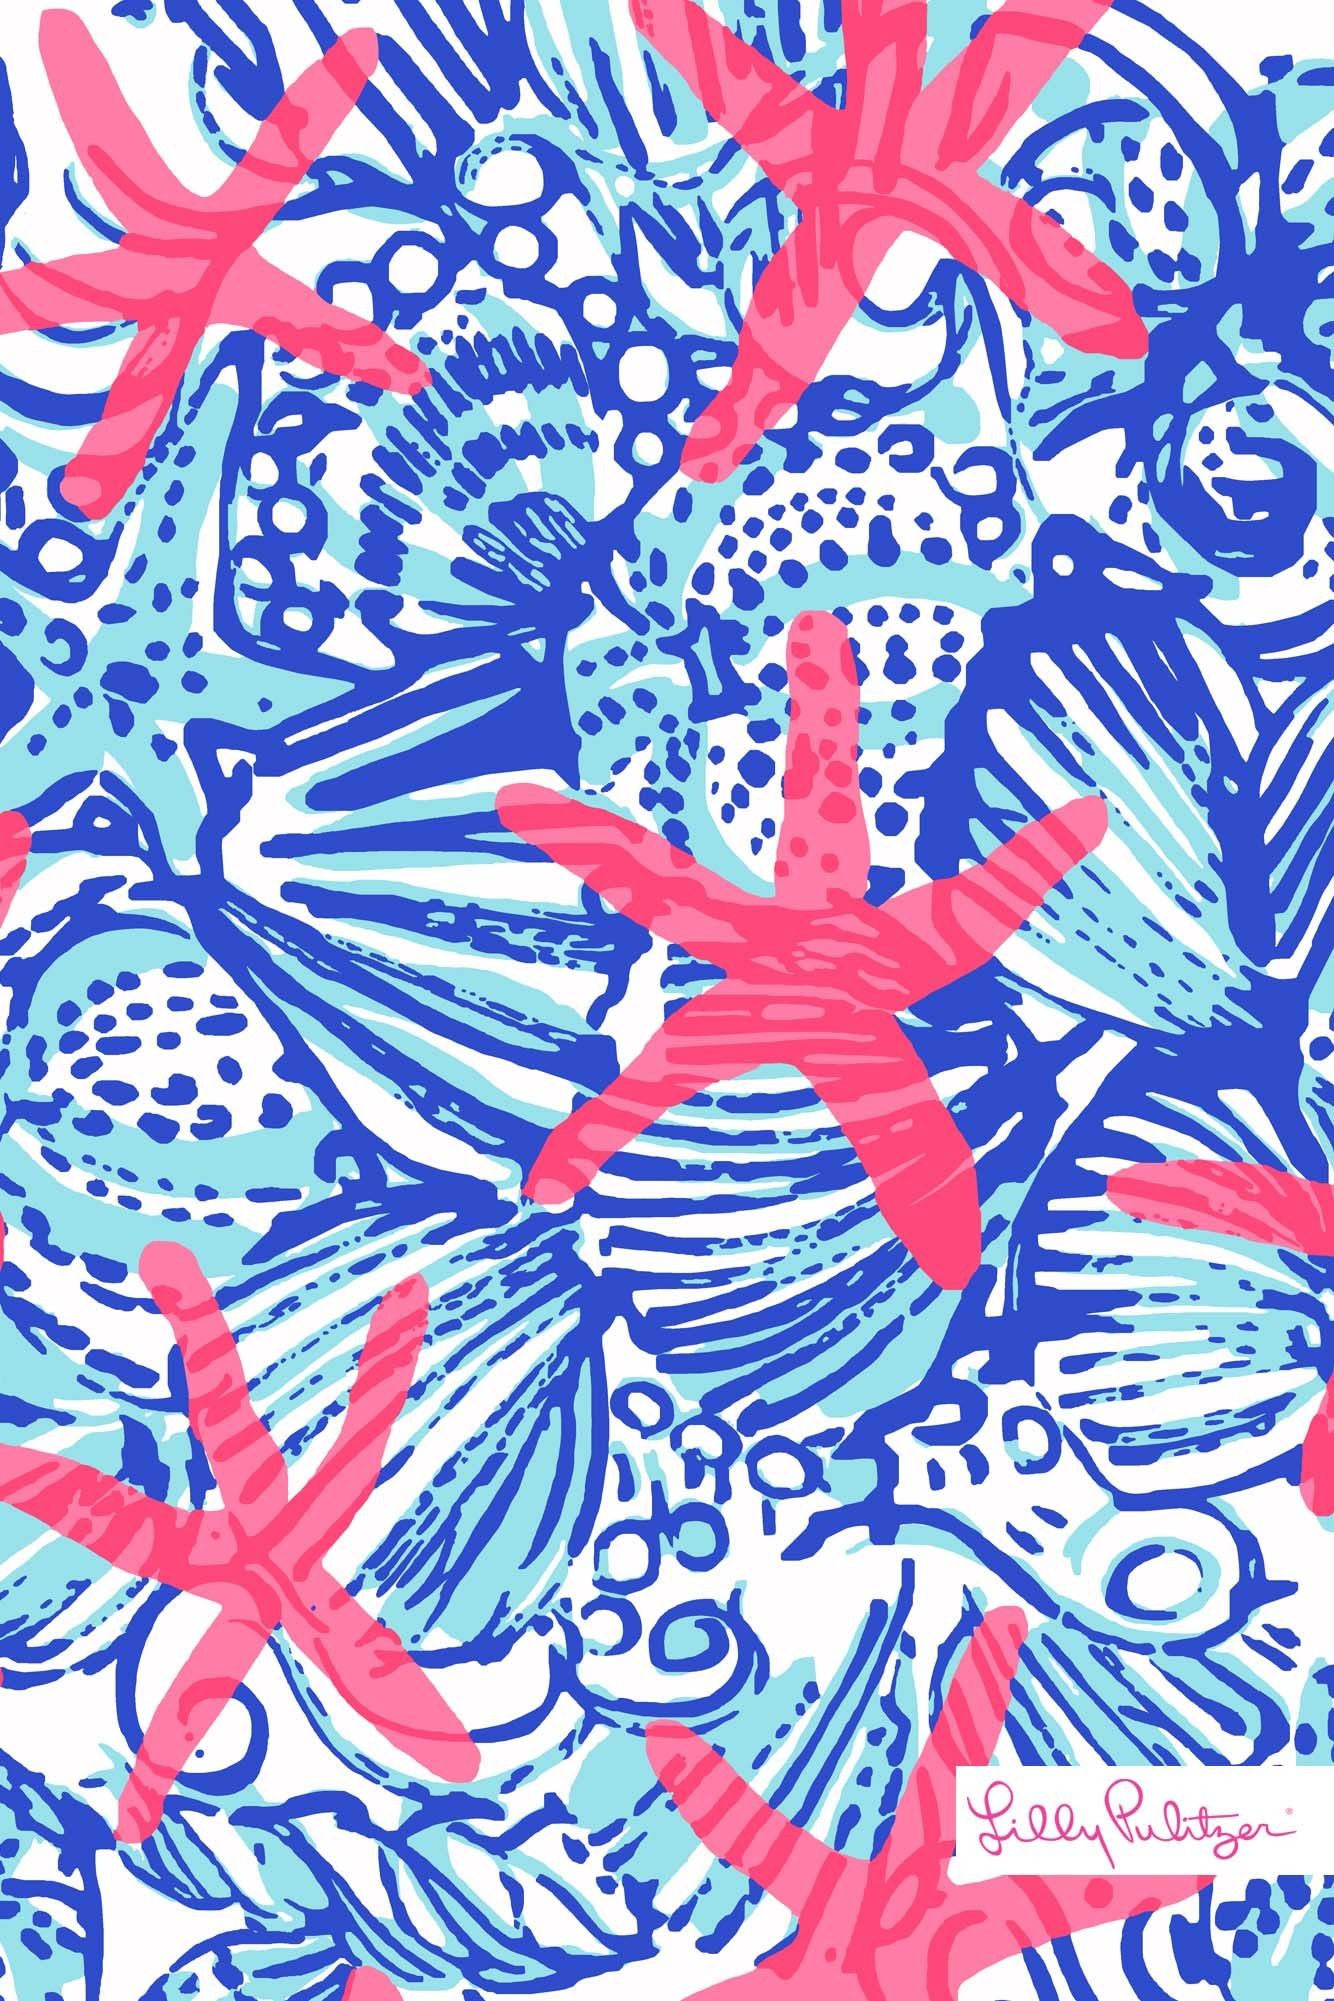 1334x2001 iphone 5 wallpaper lilly pulitzer - Google Search